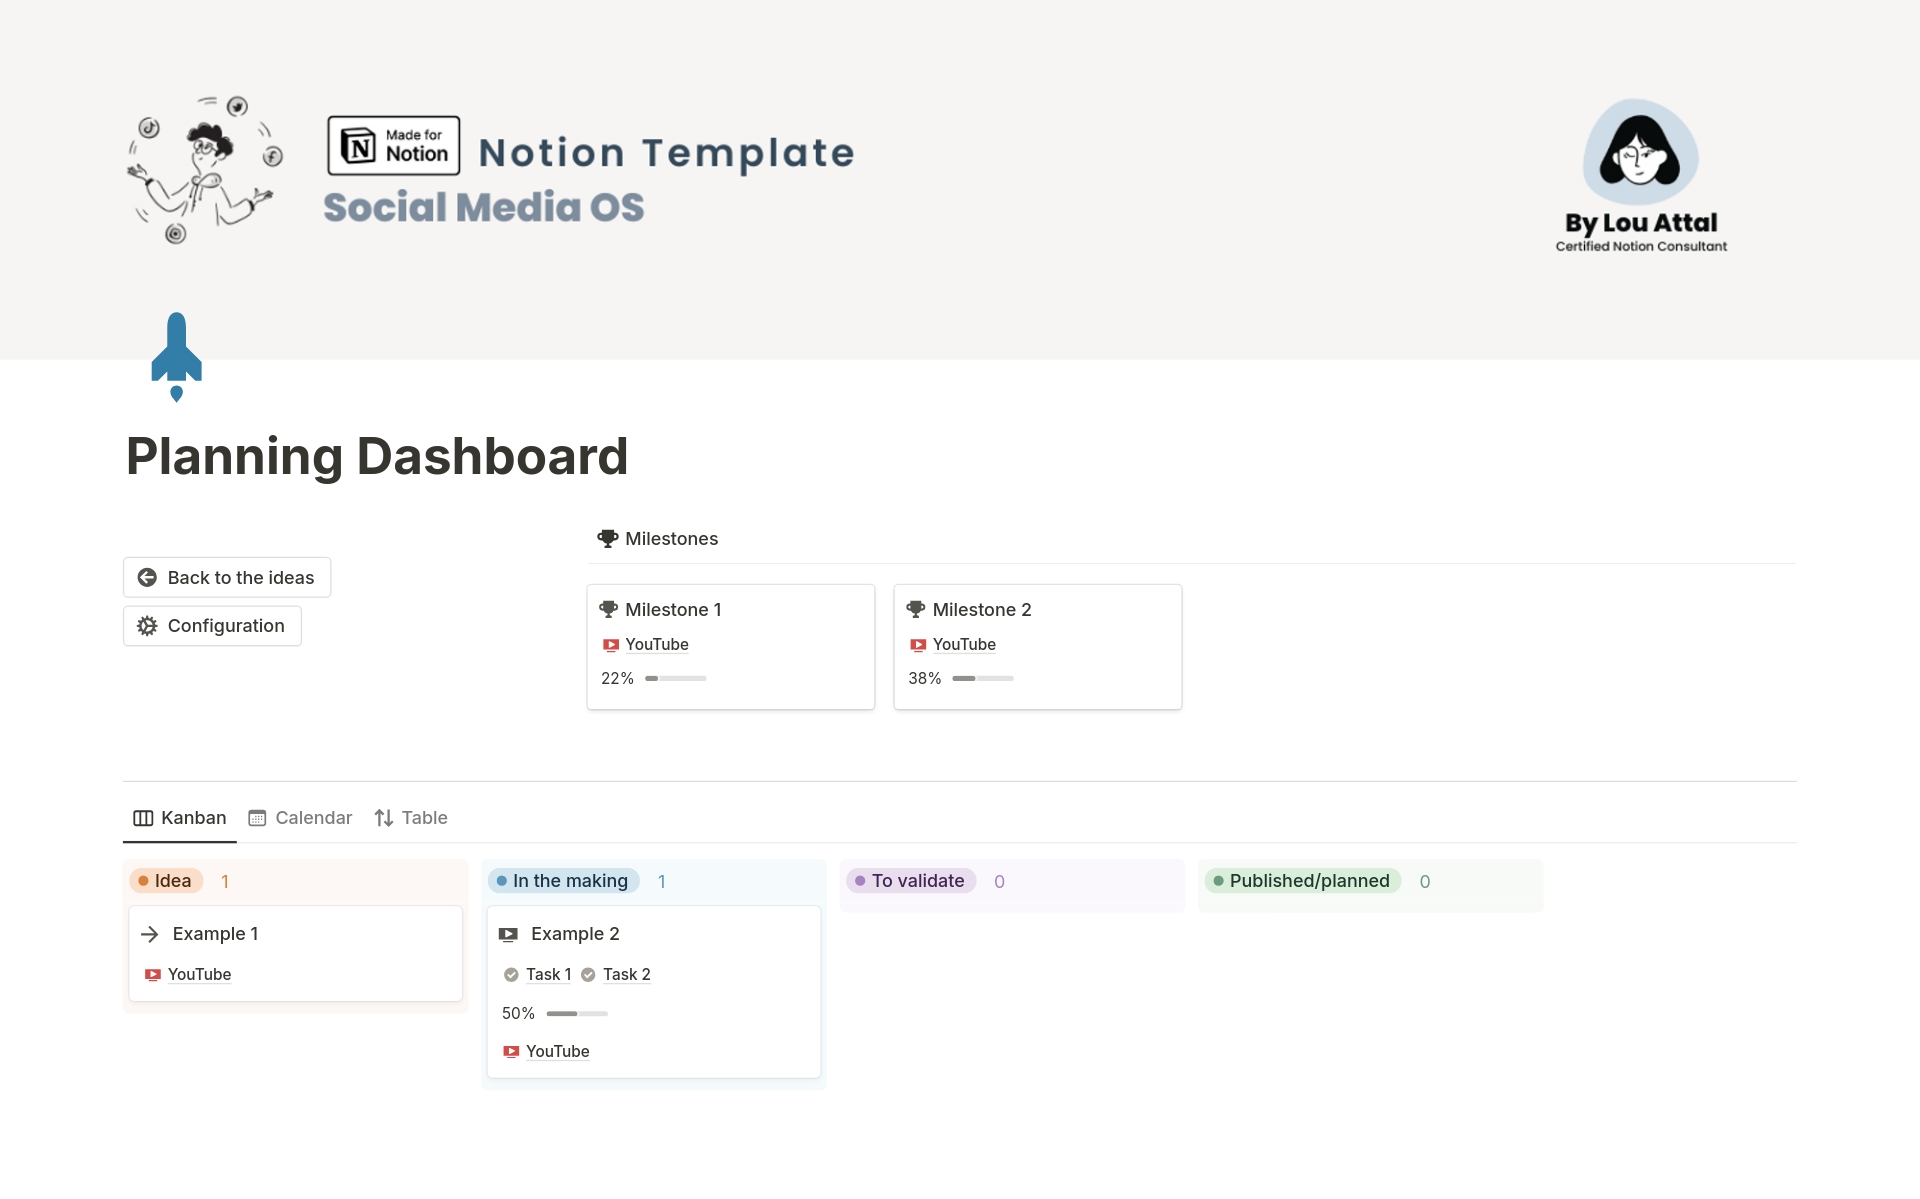 The all-in-one Notion template to manage your content on social networks 🚀